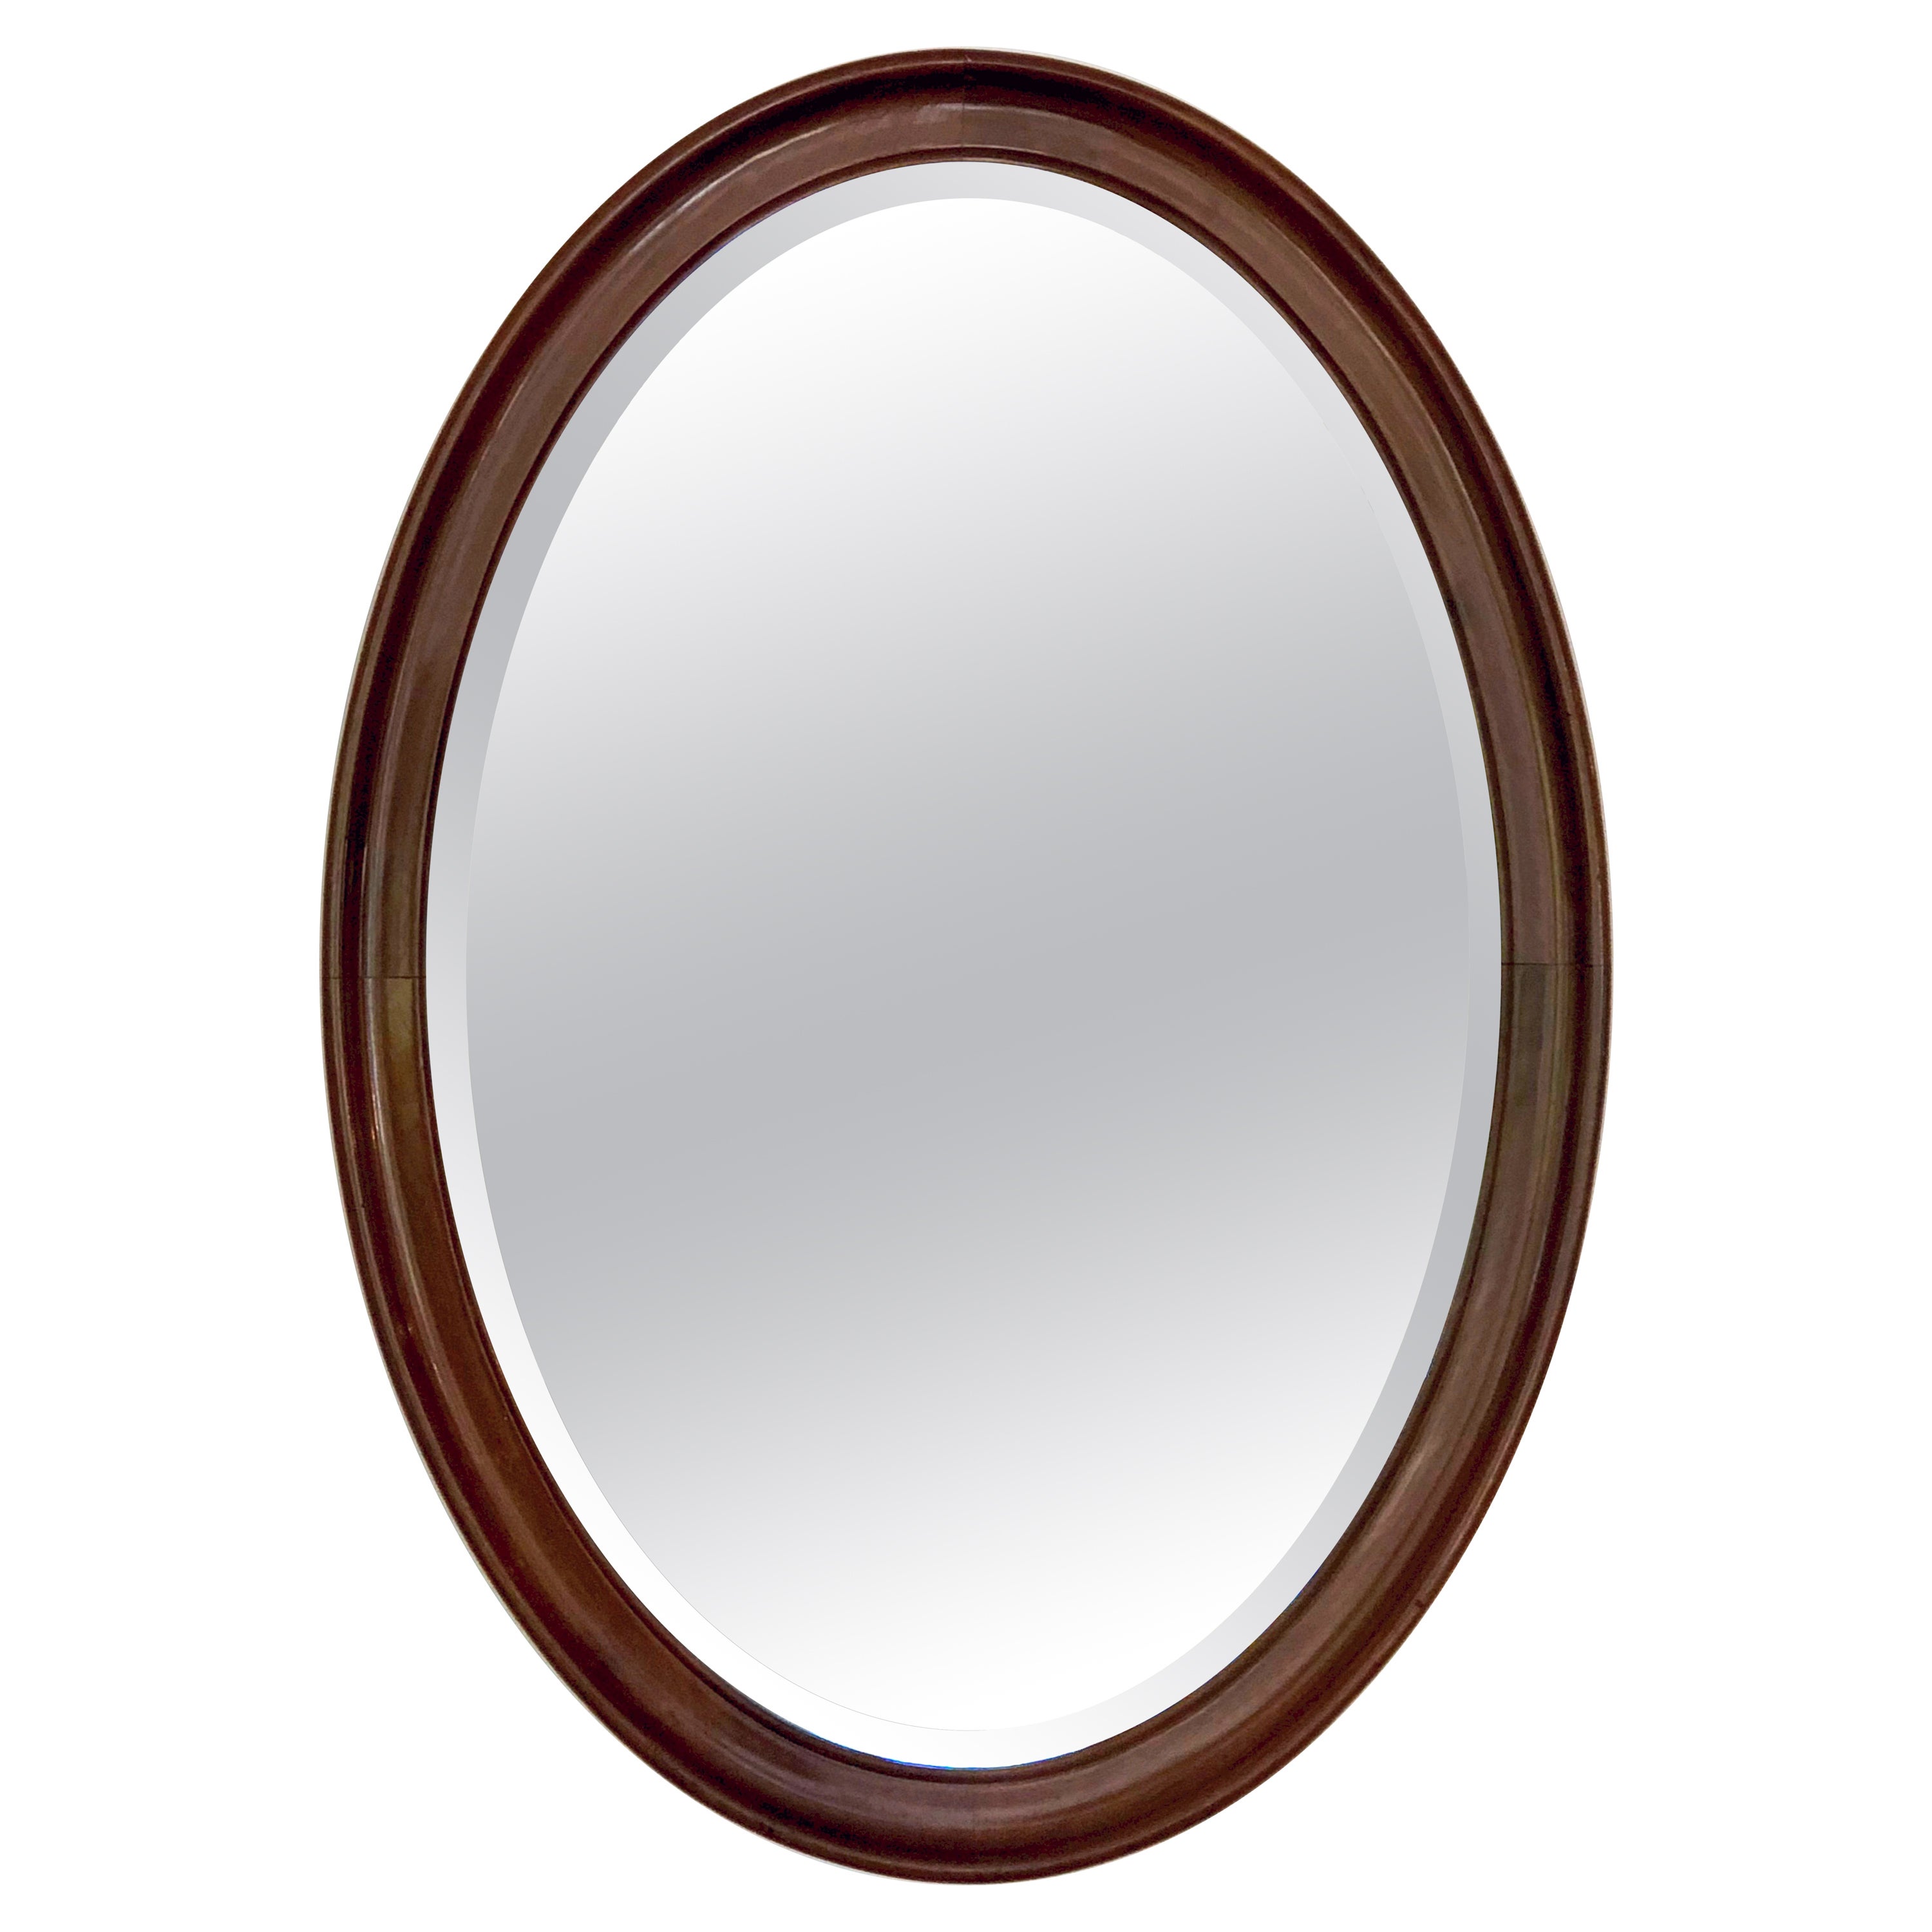 Oval Parlor Mirror of Mahogany from England